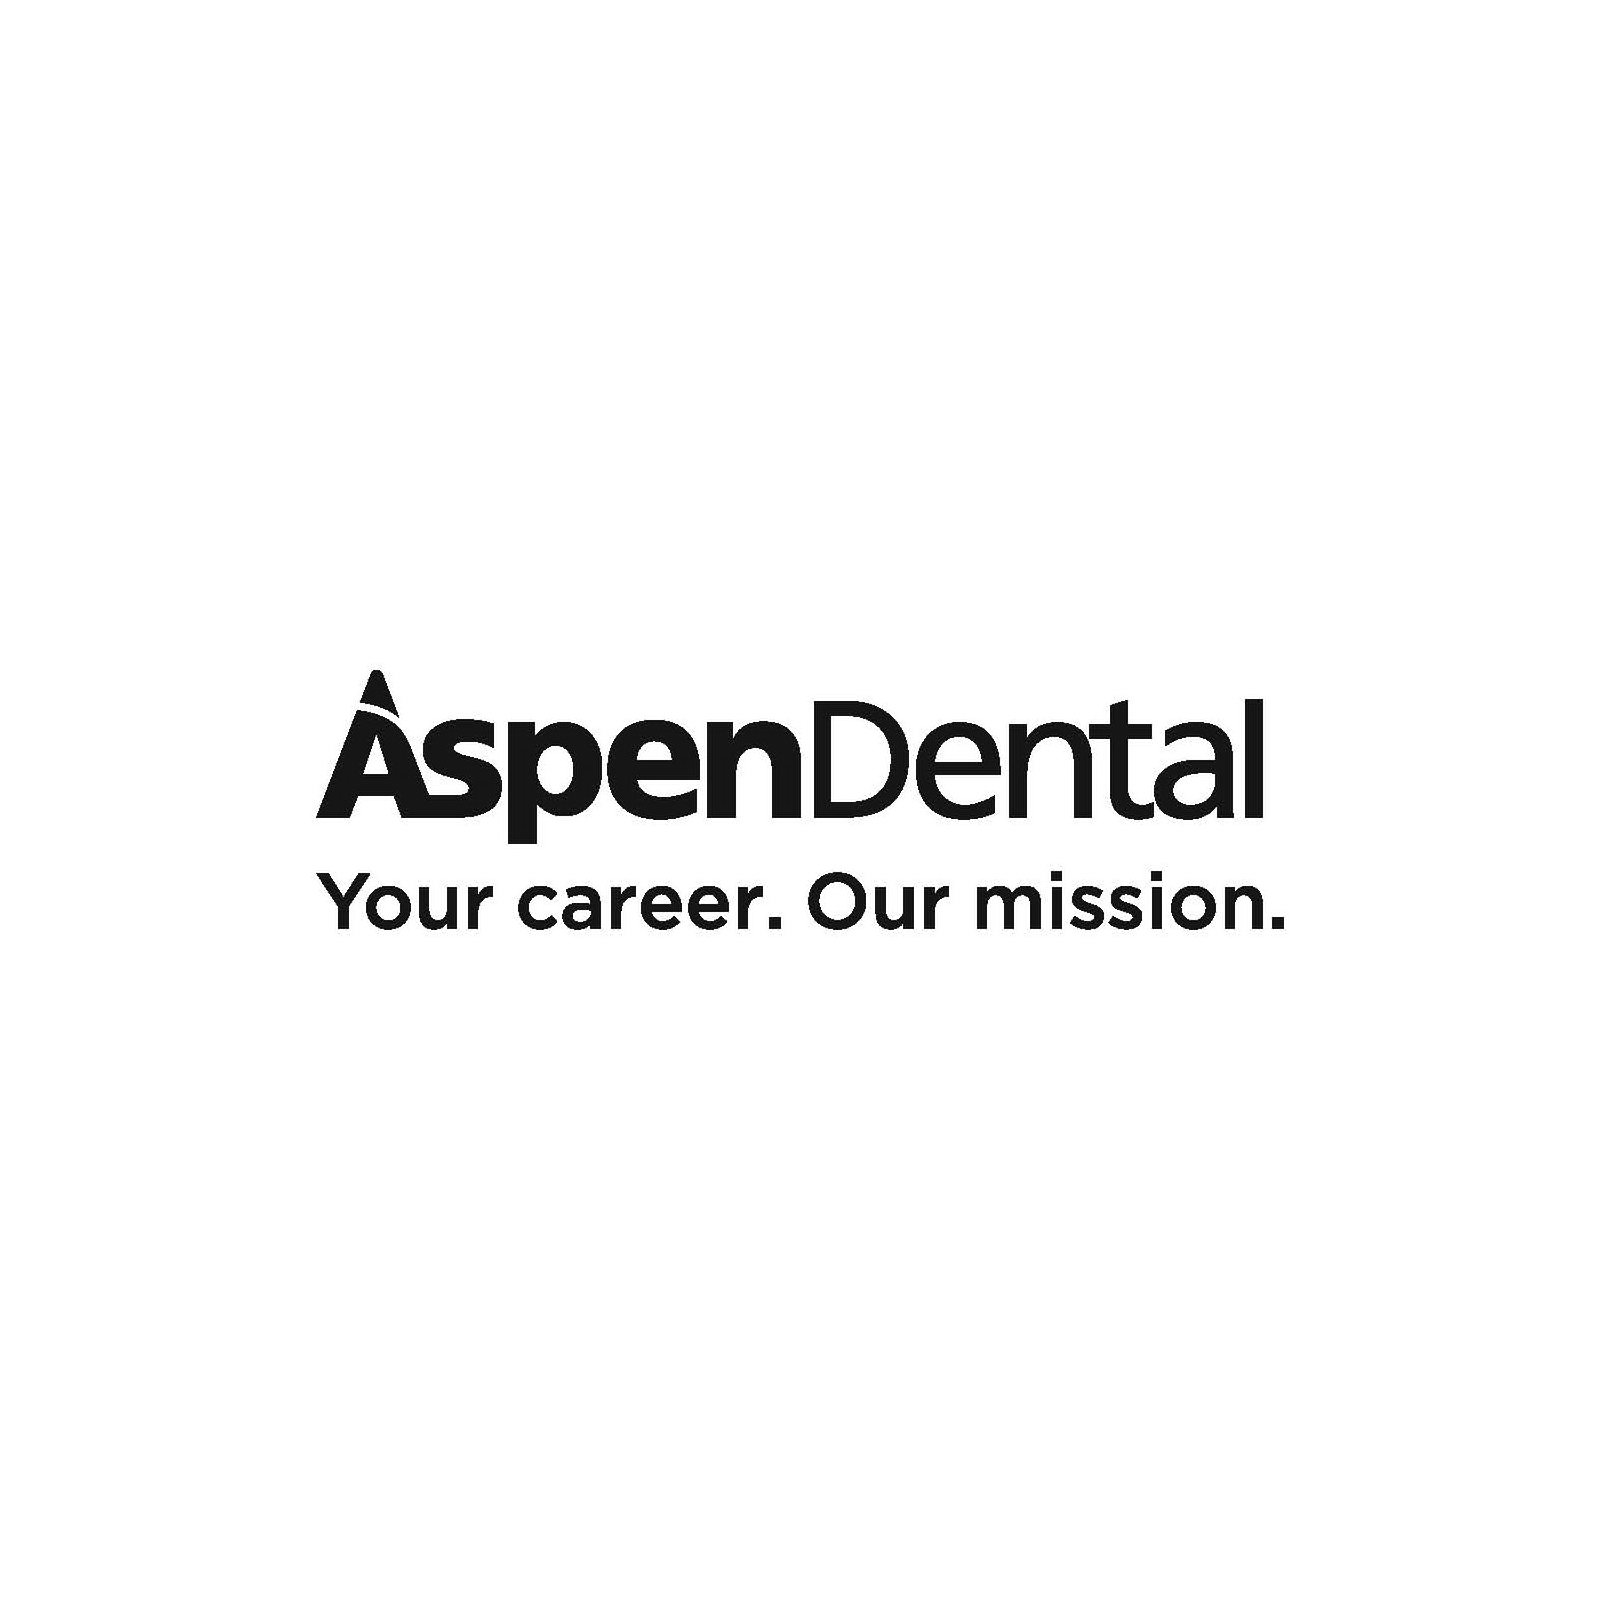  ASPENDENTAL YOUR CAREER. OUR MISSION.